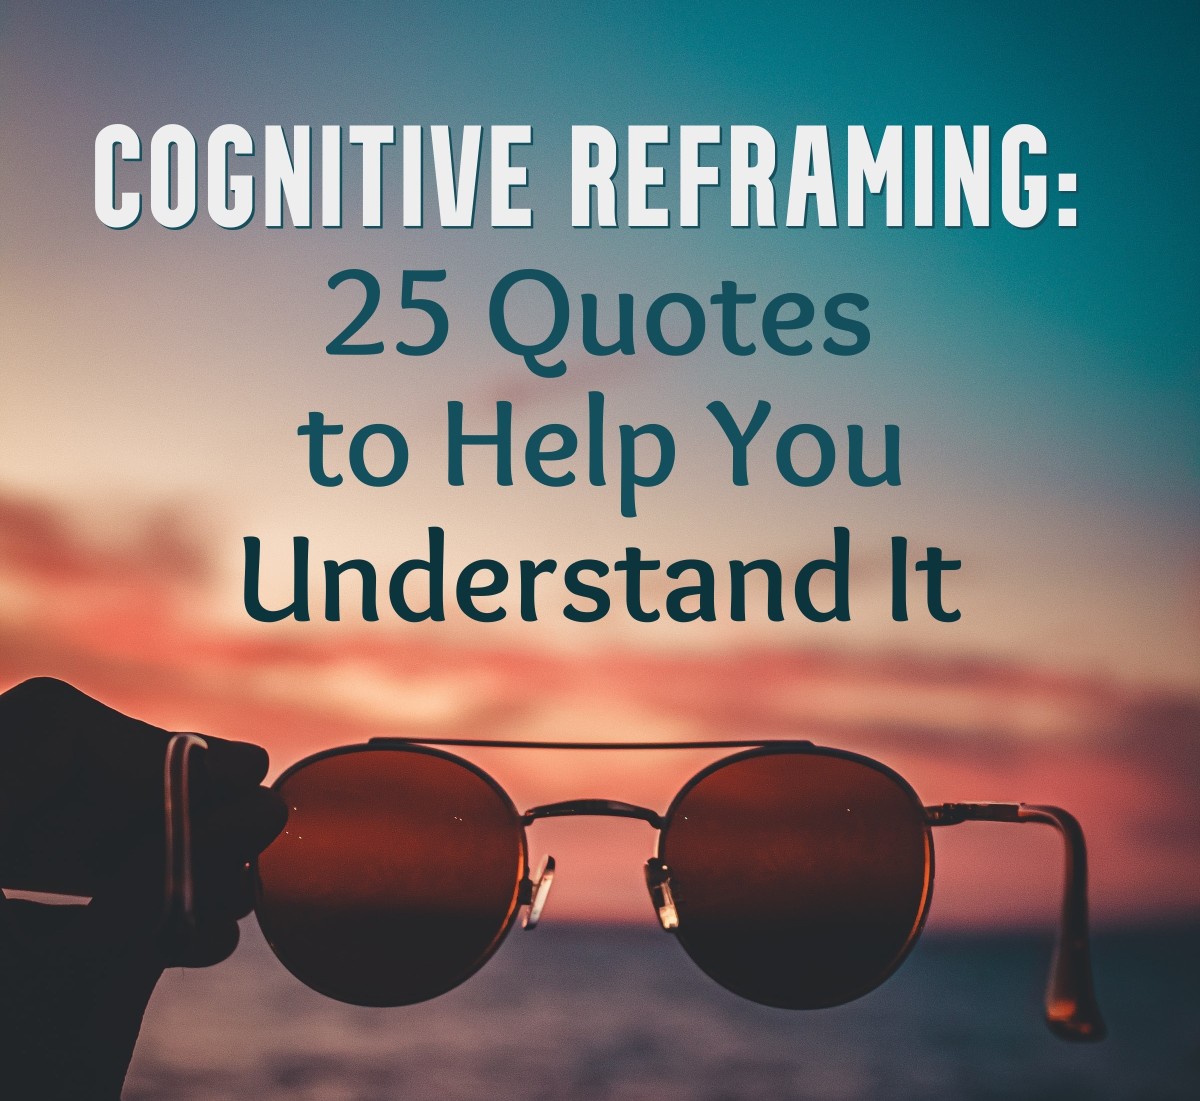 Cognitive reframing is like changing the tint on your sunglasses.